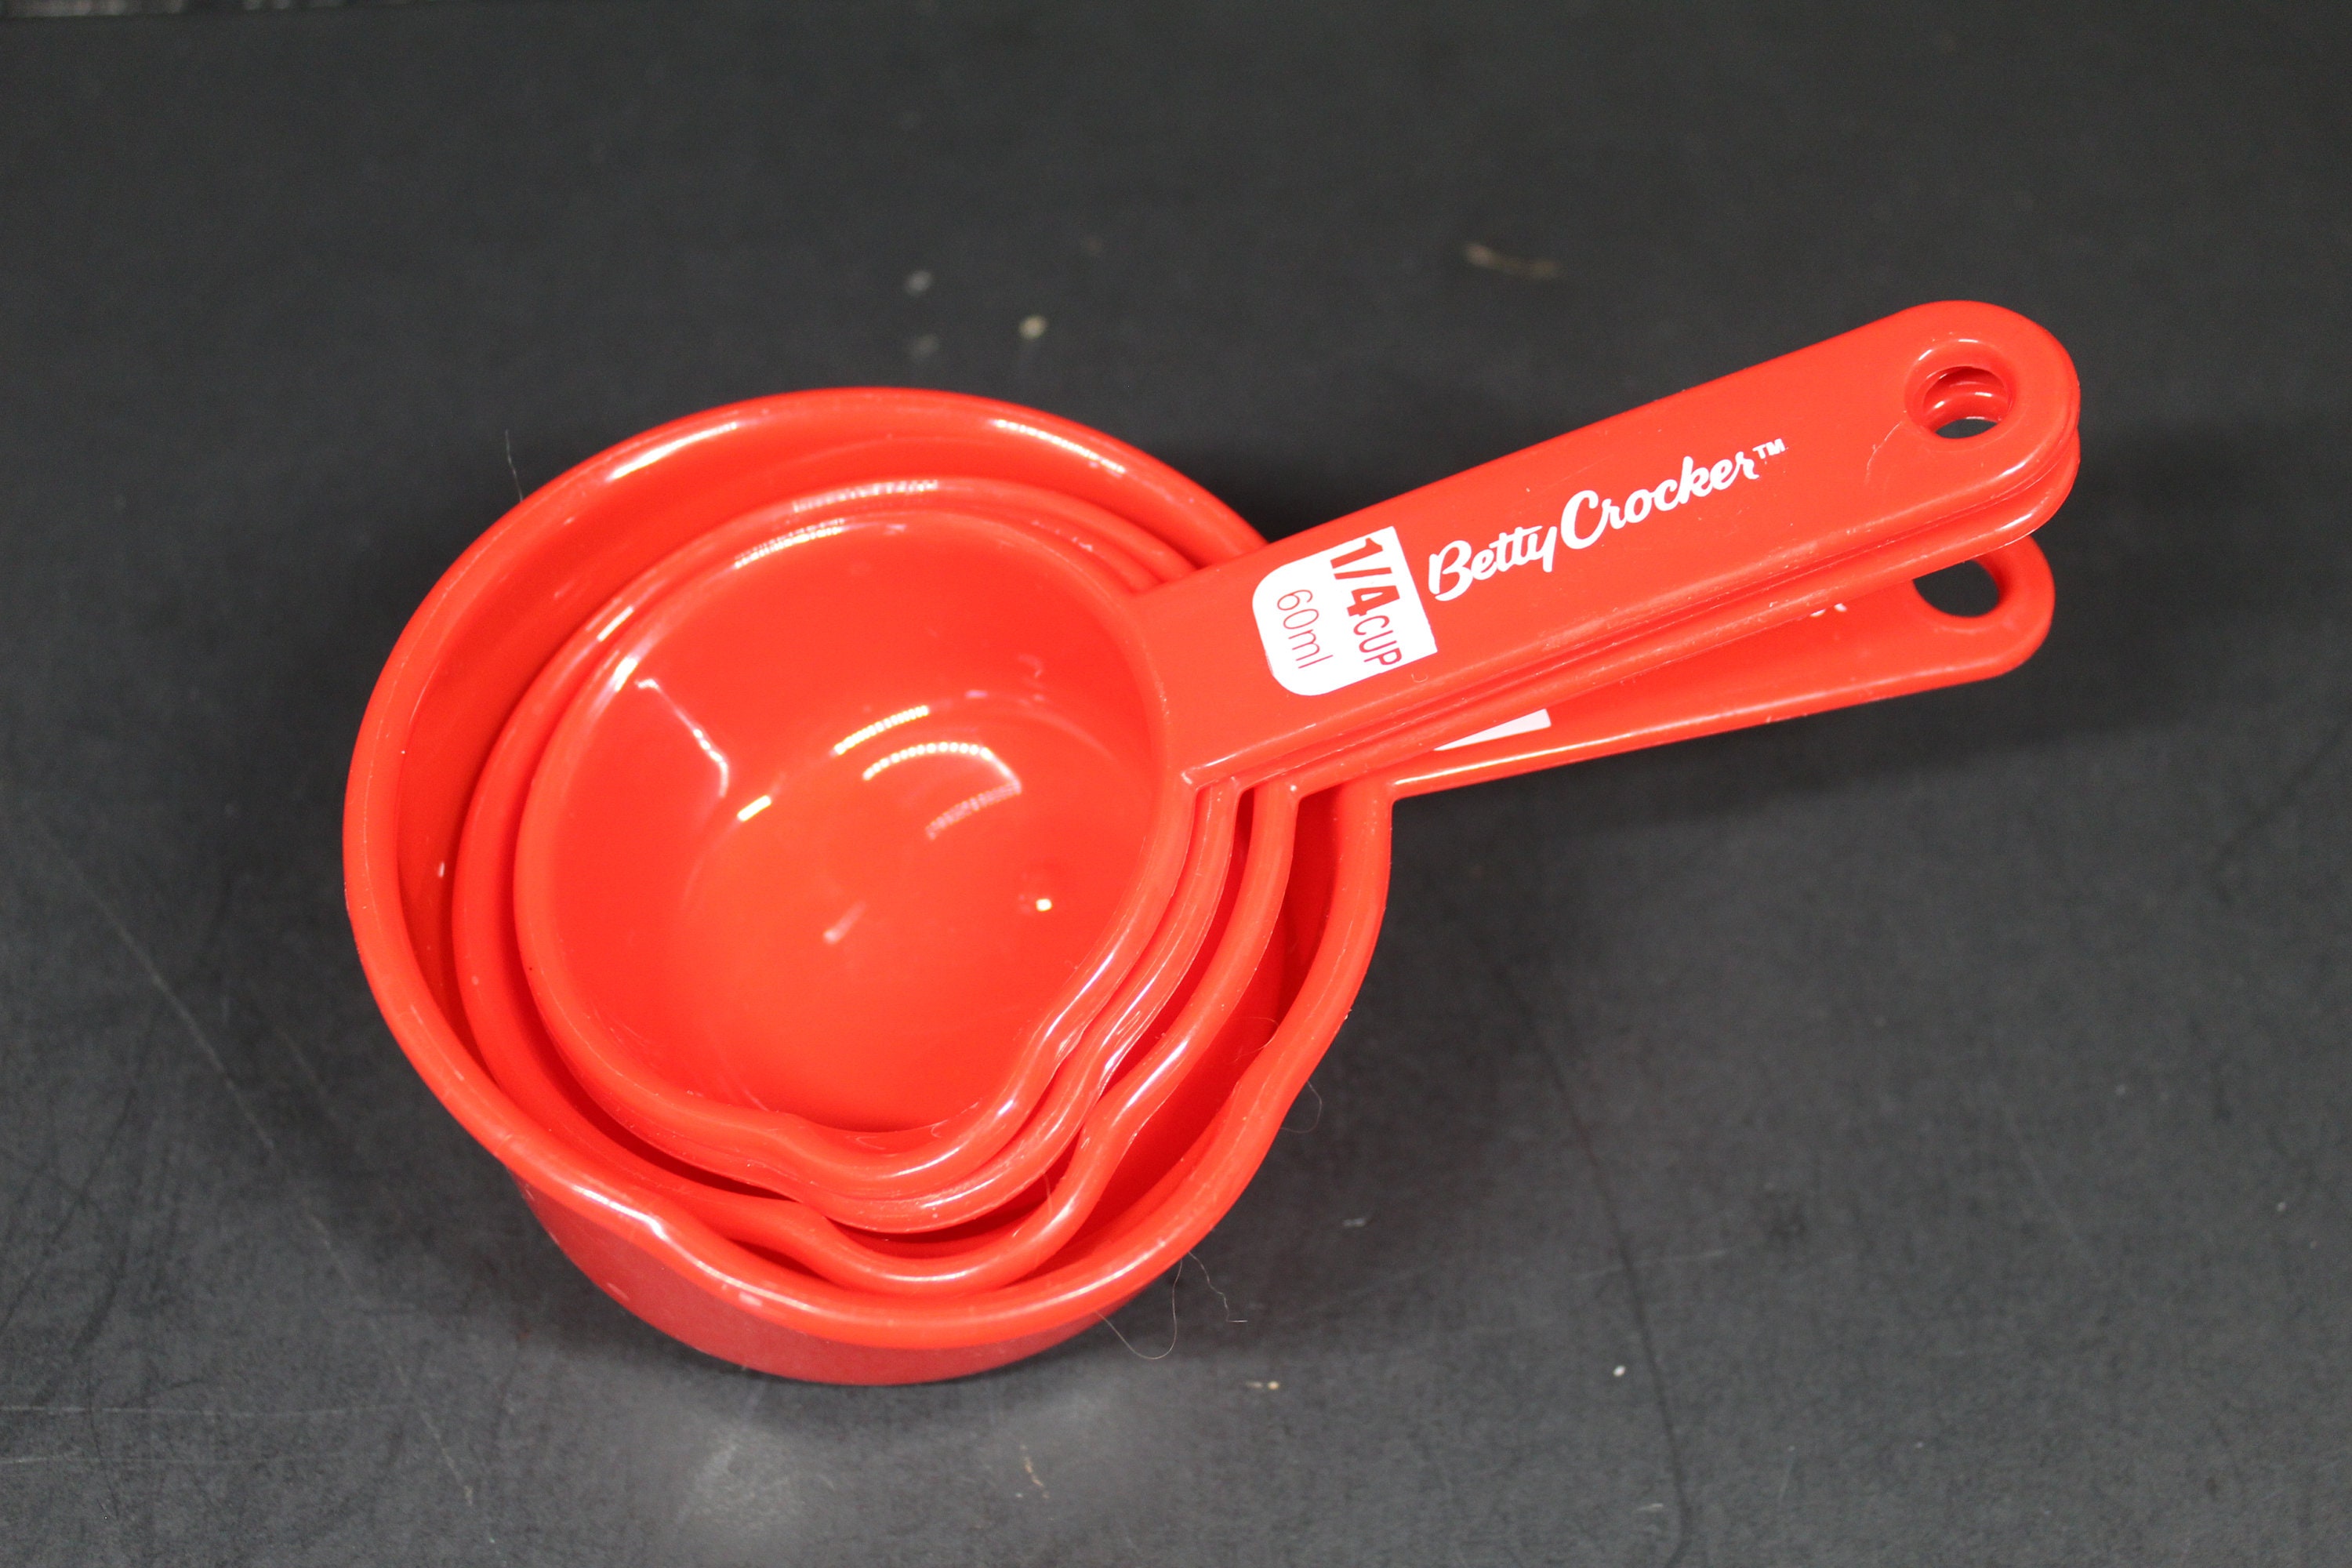 Red Heart Measuring Cups – Decor CT